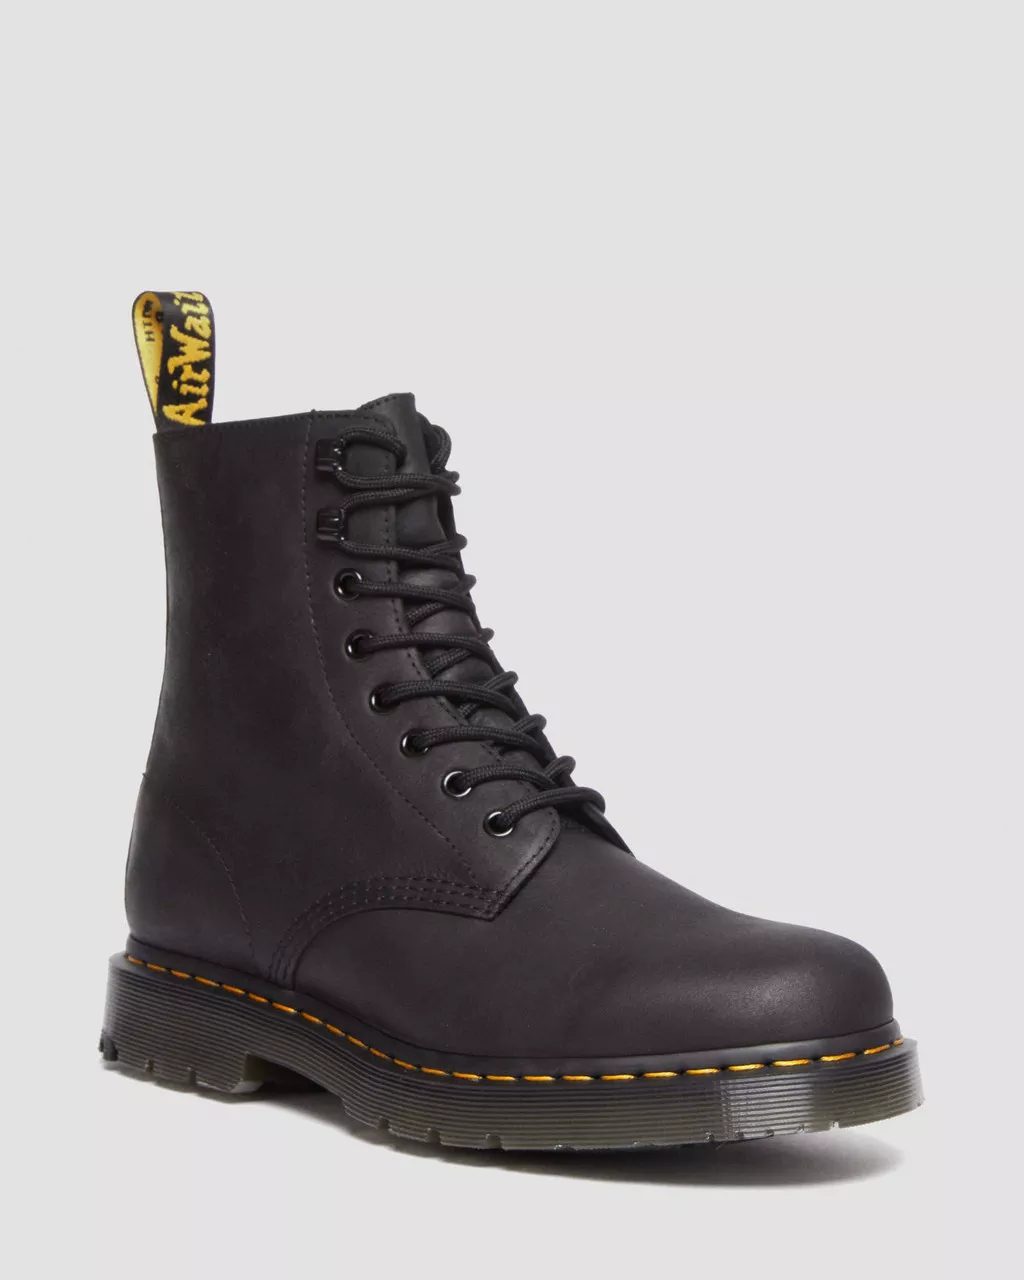 Dr. Martens - 1460 PASCAL WINTERGRIP - Black (Outlaw WP)